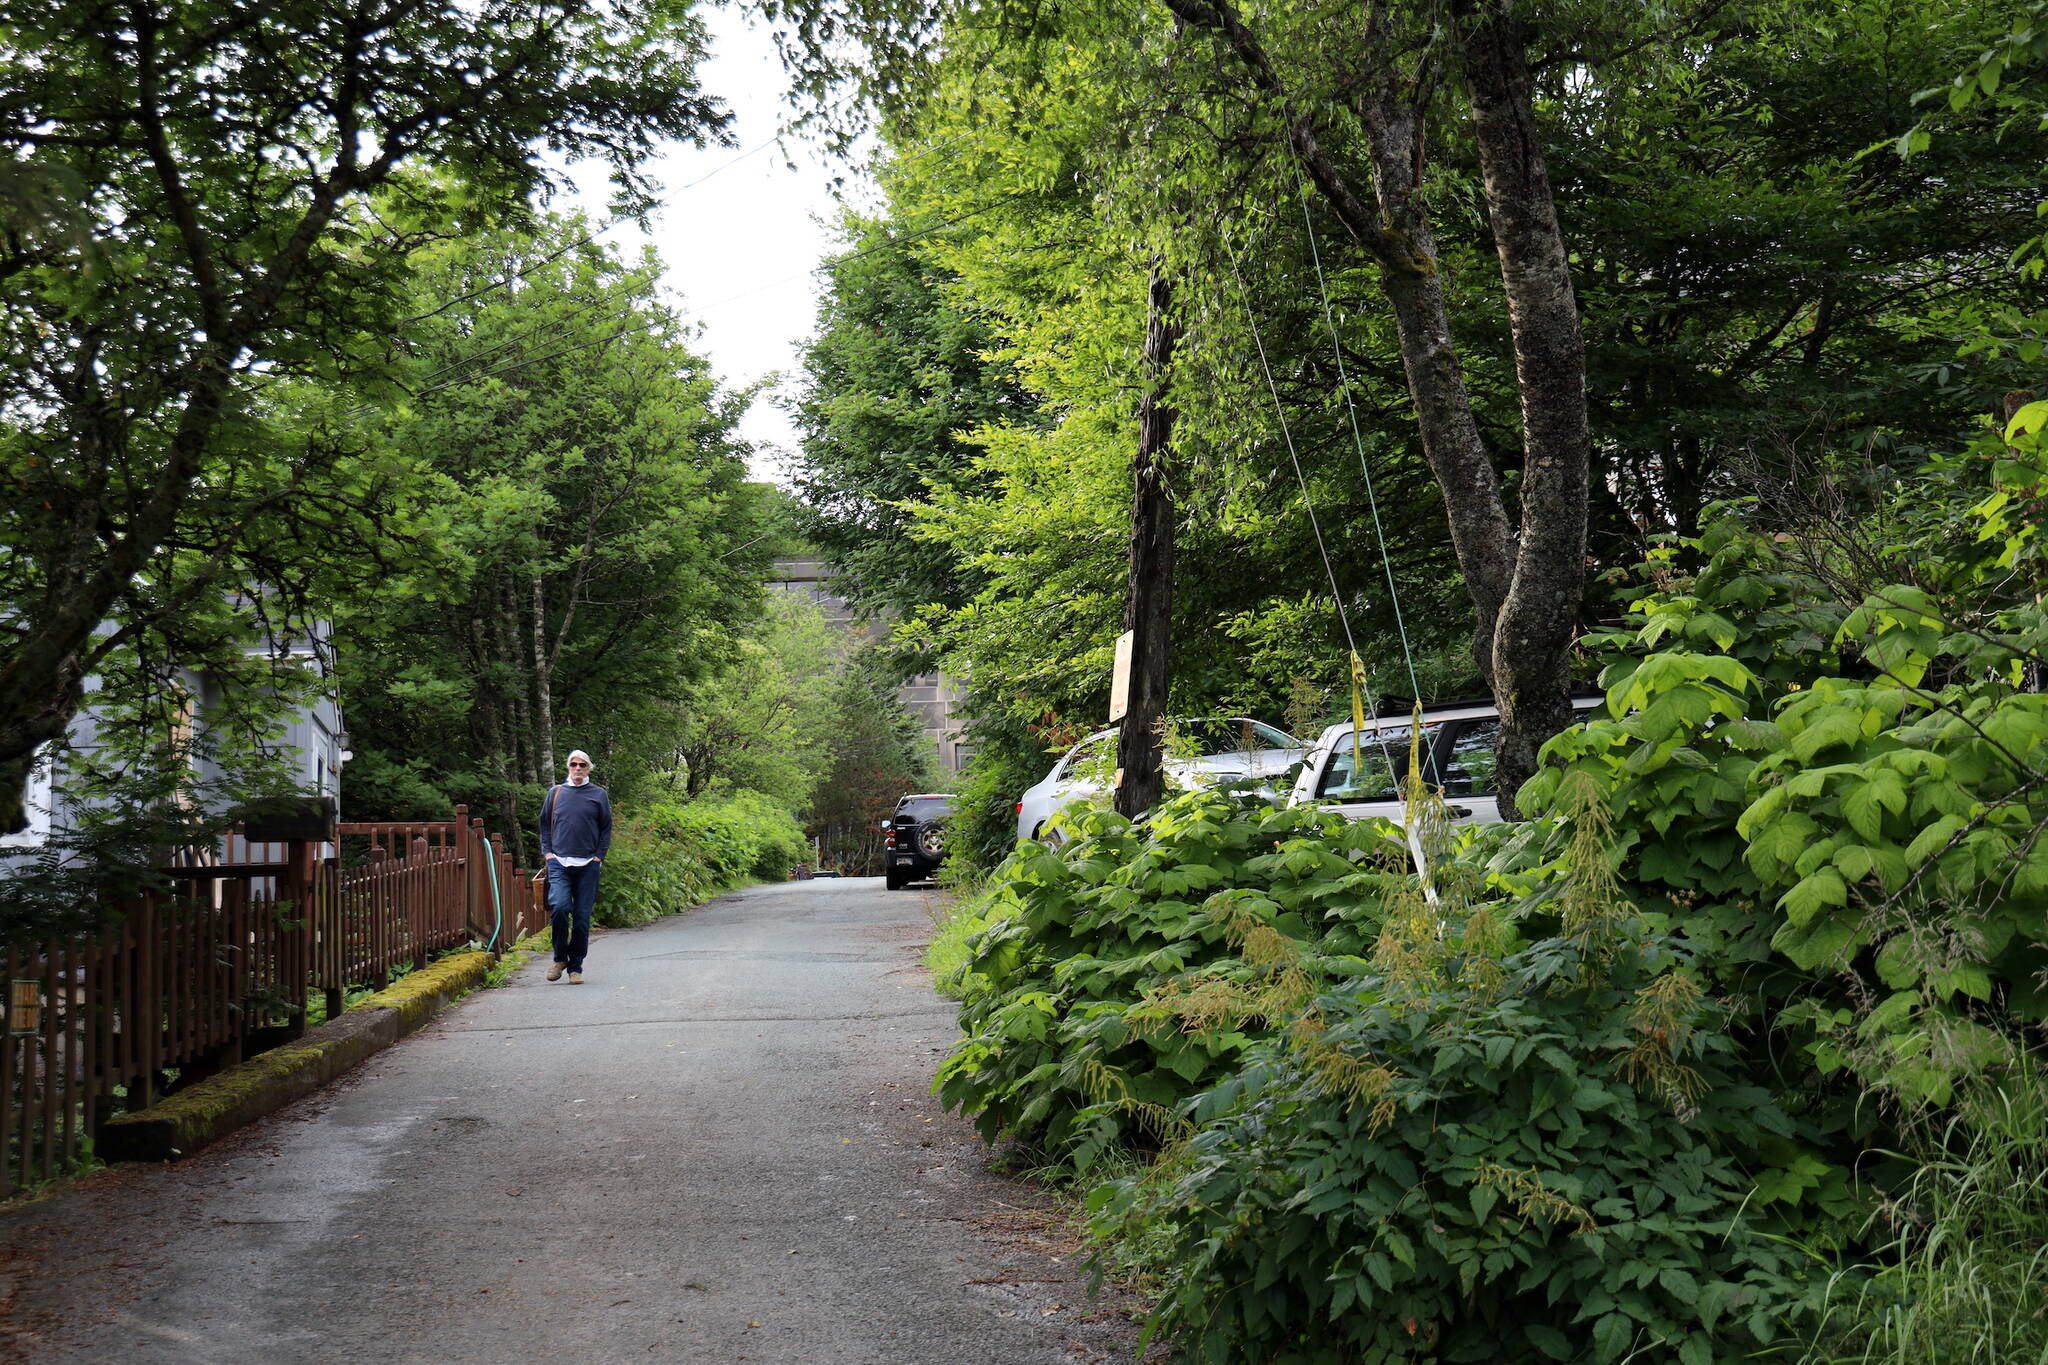 Roald Simonson, a longtime resident of Juneau’s Telephone Hill, walks down Dixon Street in the Telephone Hill area on Wednesday evening. He said he plans to attend the upcoming city hosted meeting to discuss possible redevelopment plans for the area. (Clarise Larson / Juneau Empire)